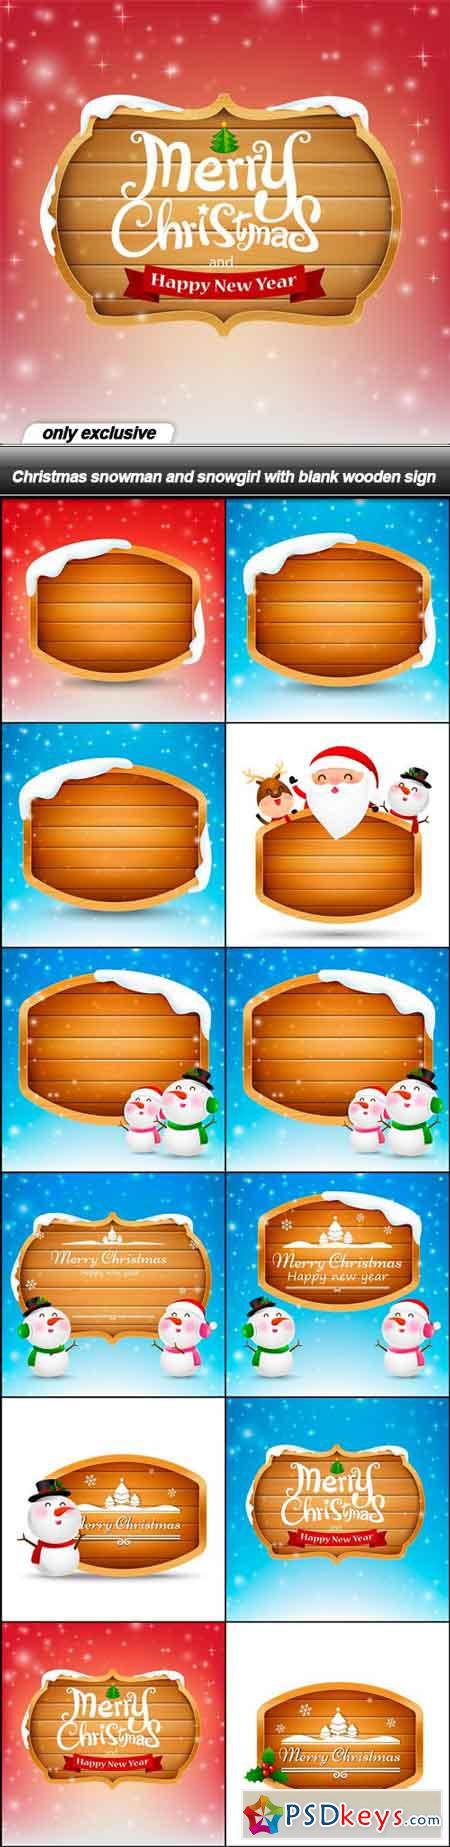 Christmas snowman and snowgirl with blank wooden sign - 12 EPS